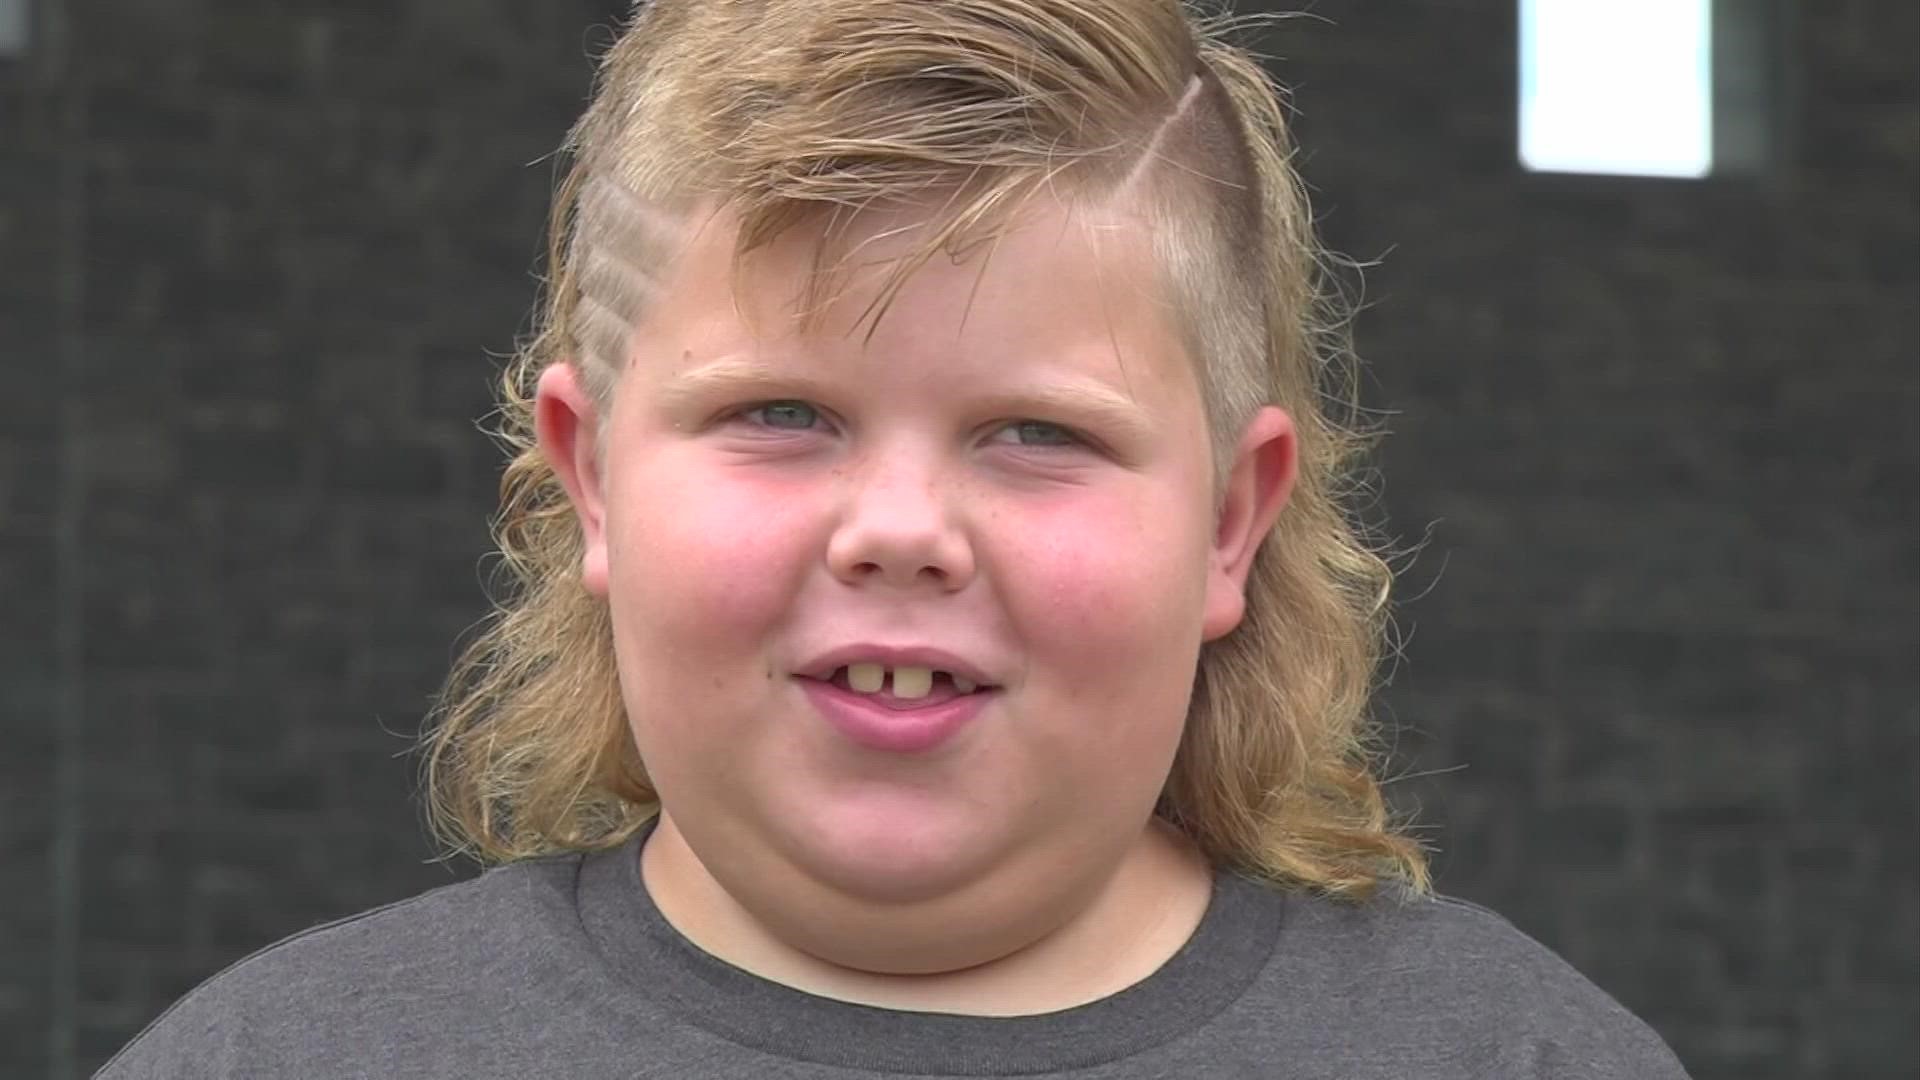 6-year-old Amherst, Ohio, boy aims to be mullet champion